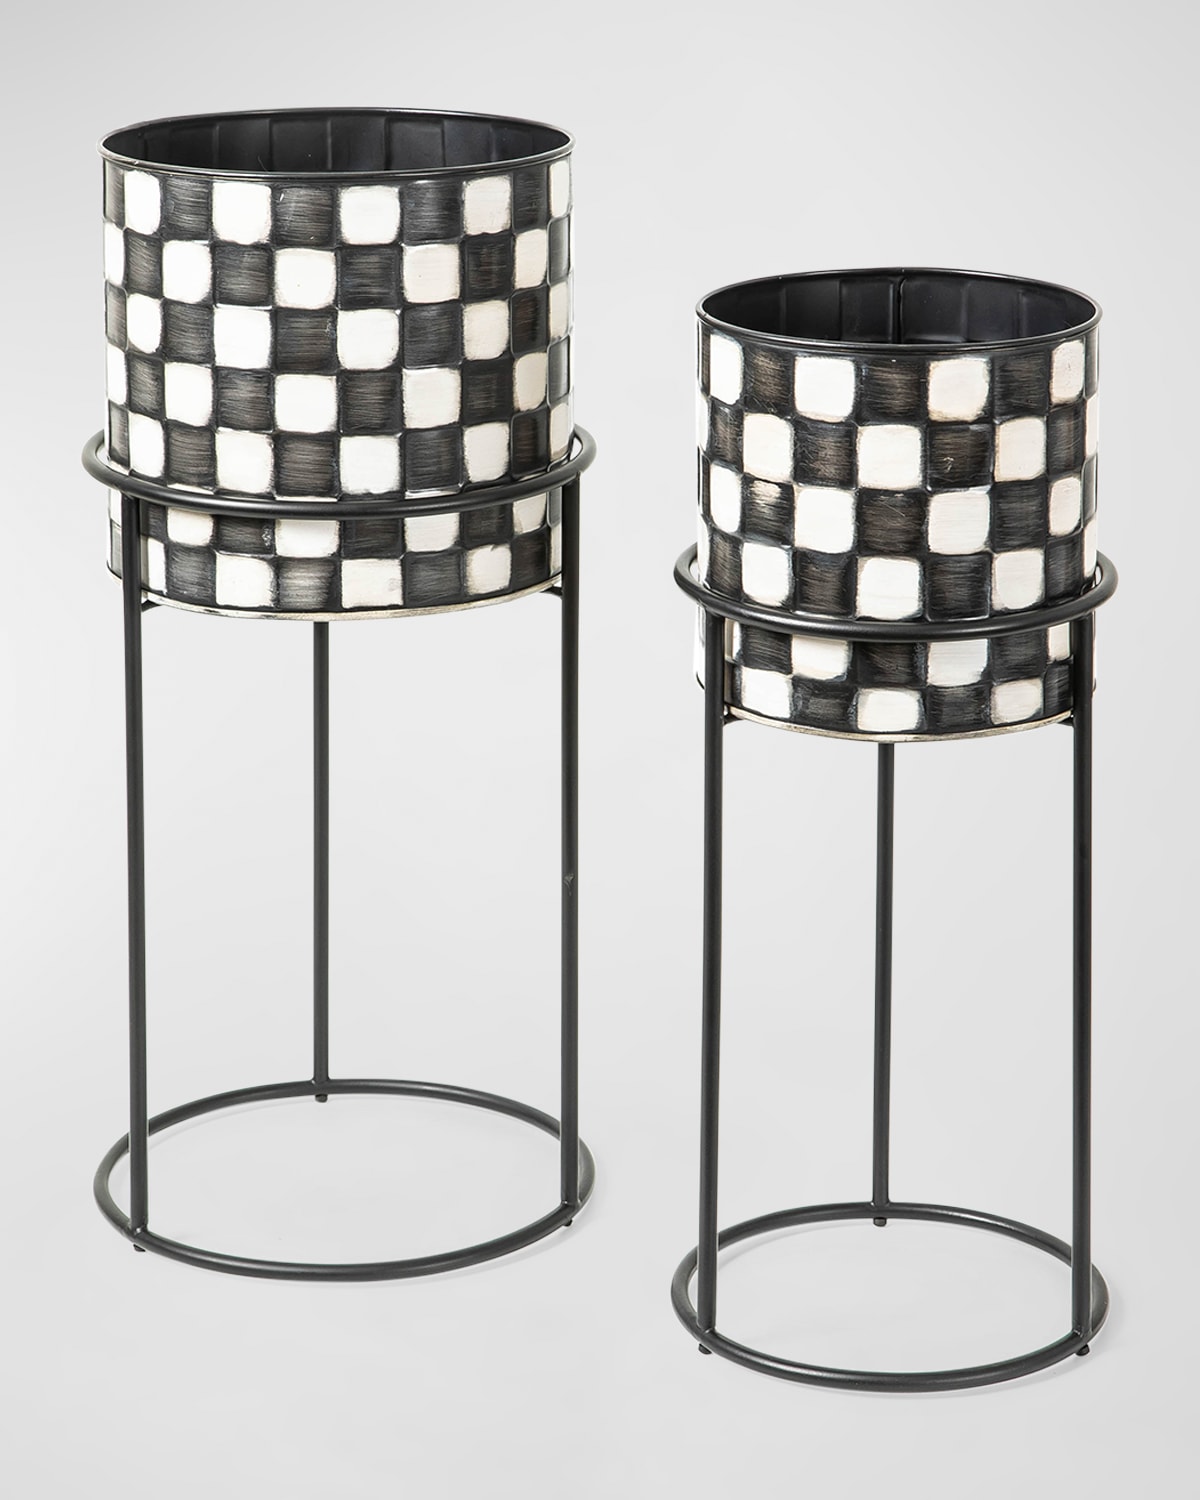 Mackenzie-childs Check It Out Planters, Set Of 2 In Black